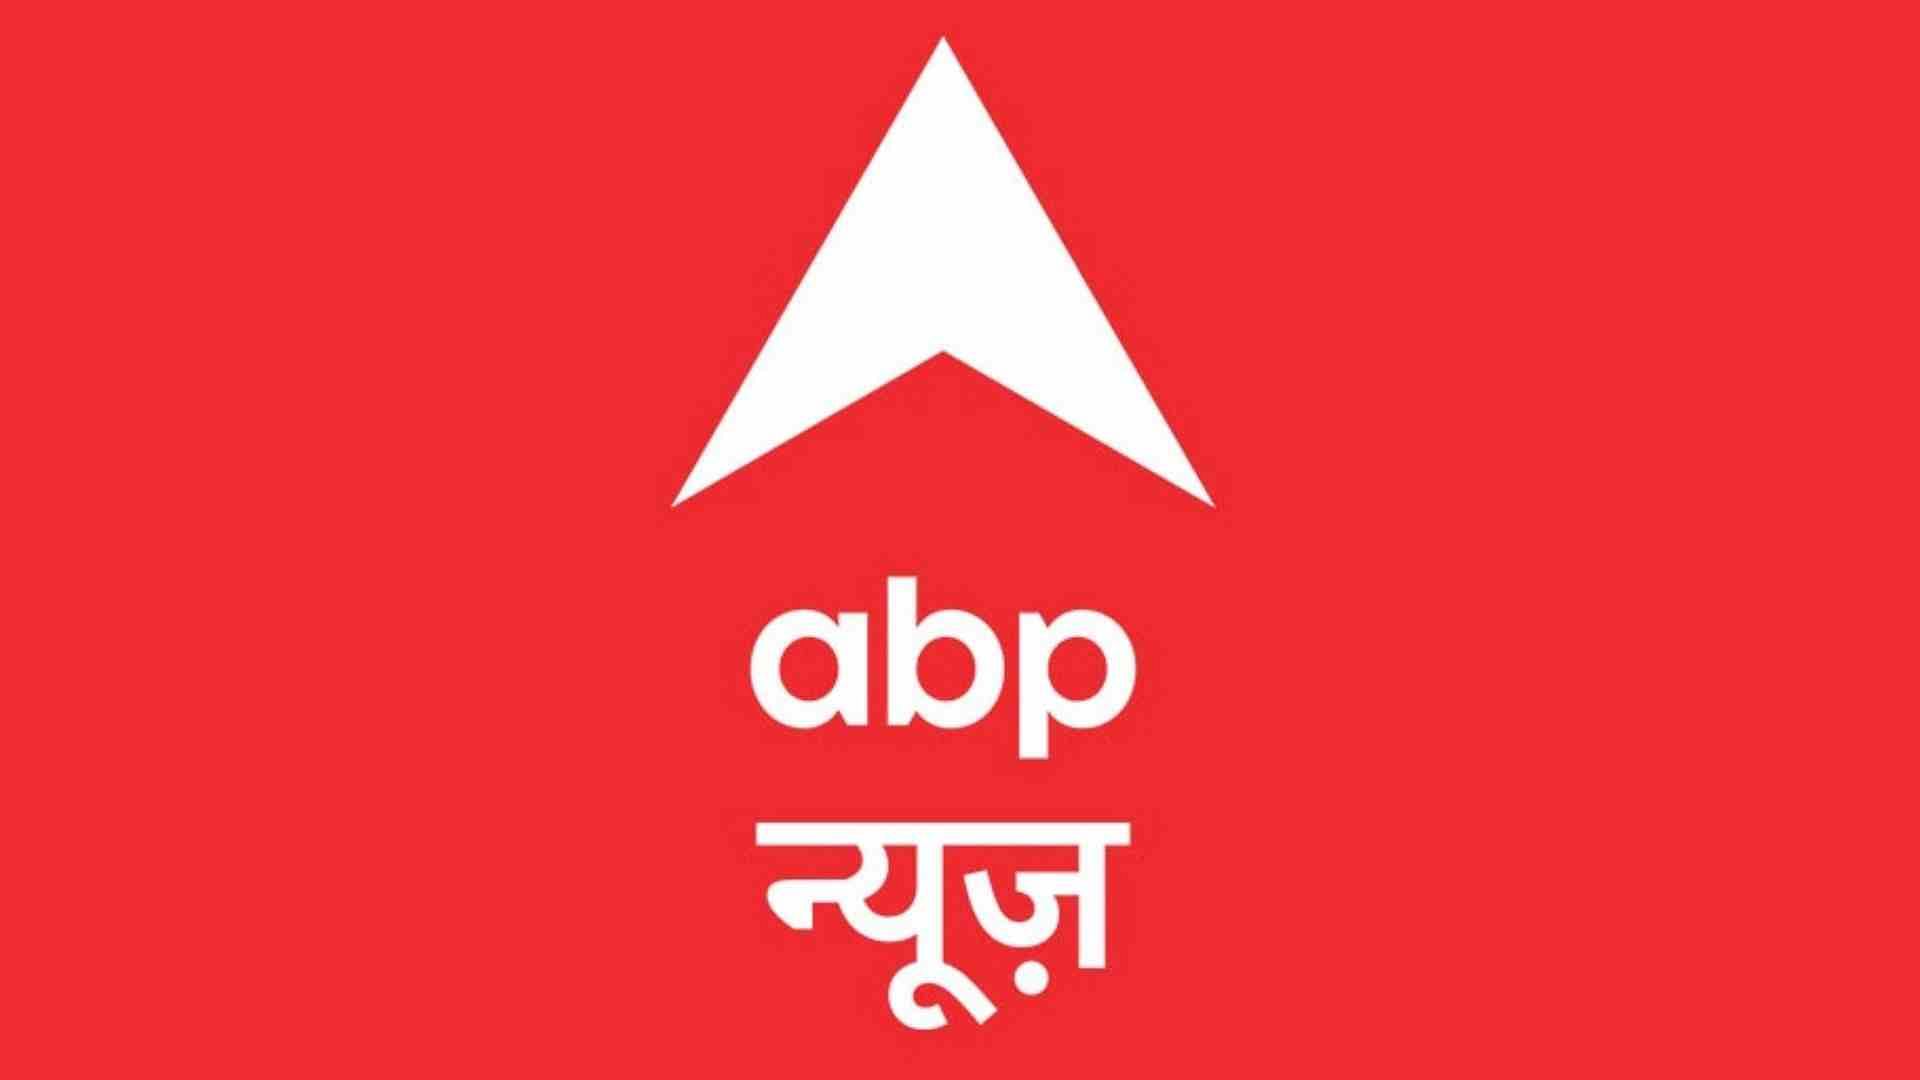 ABP News Network garners 15.7 billion impressions on YouTube in March 2020